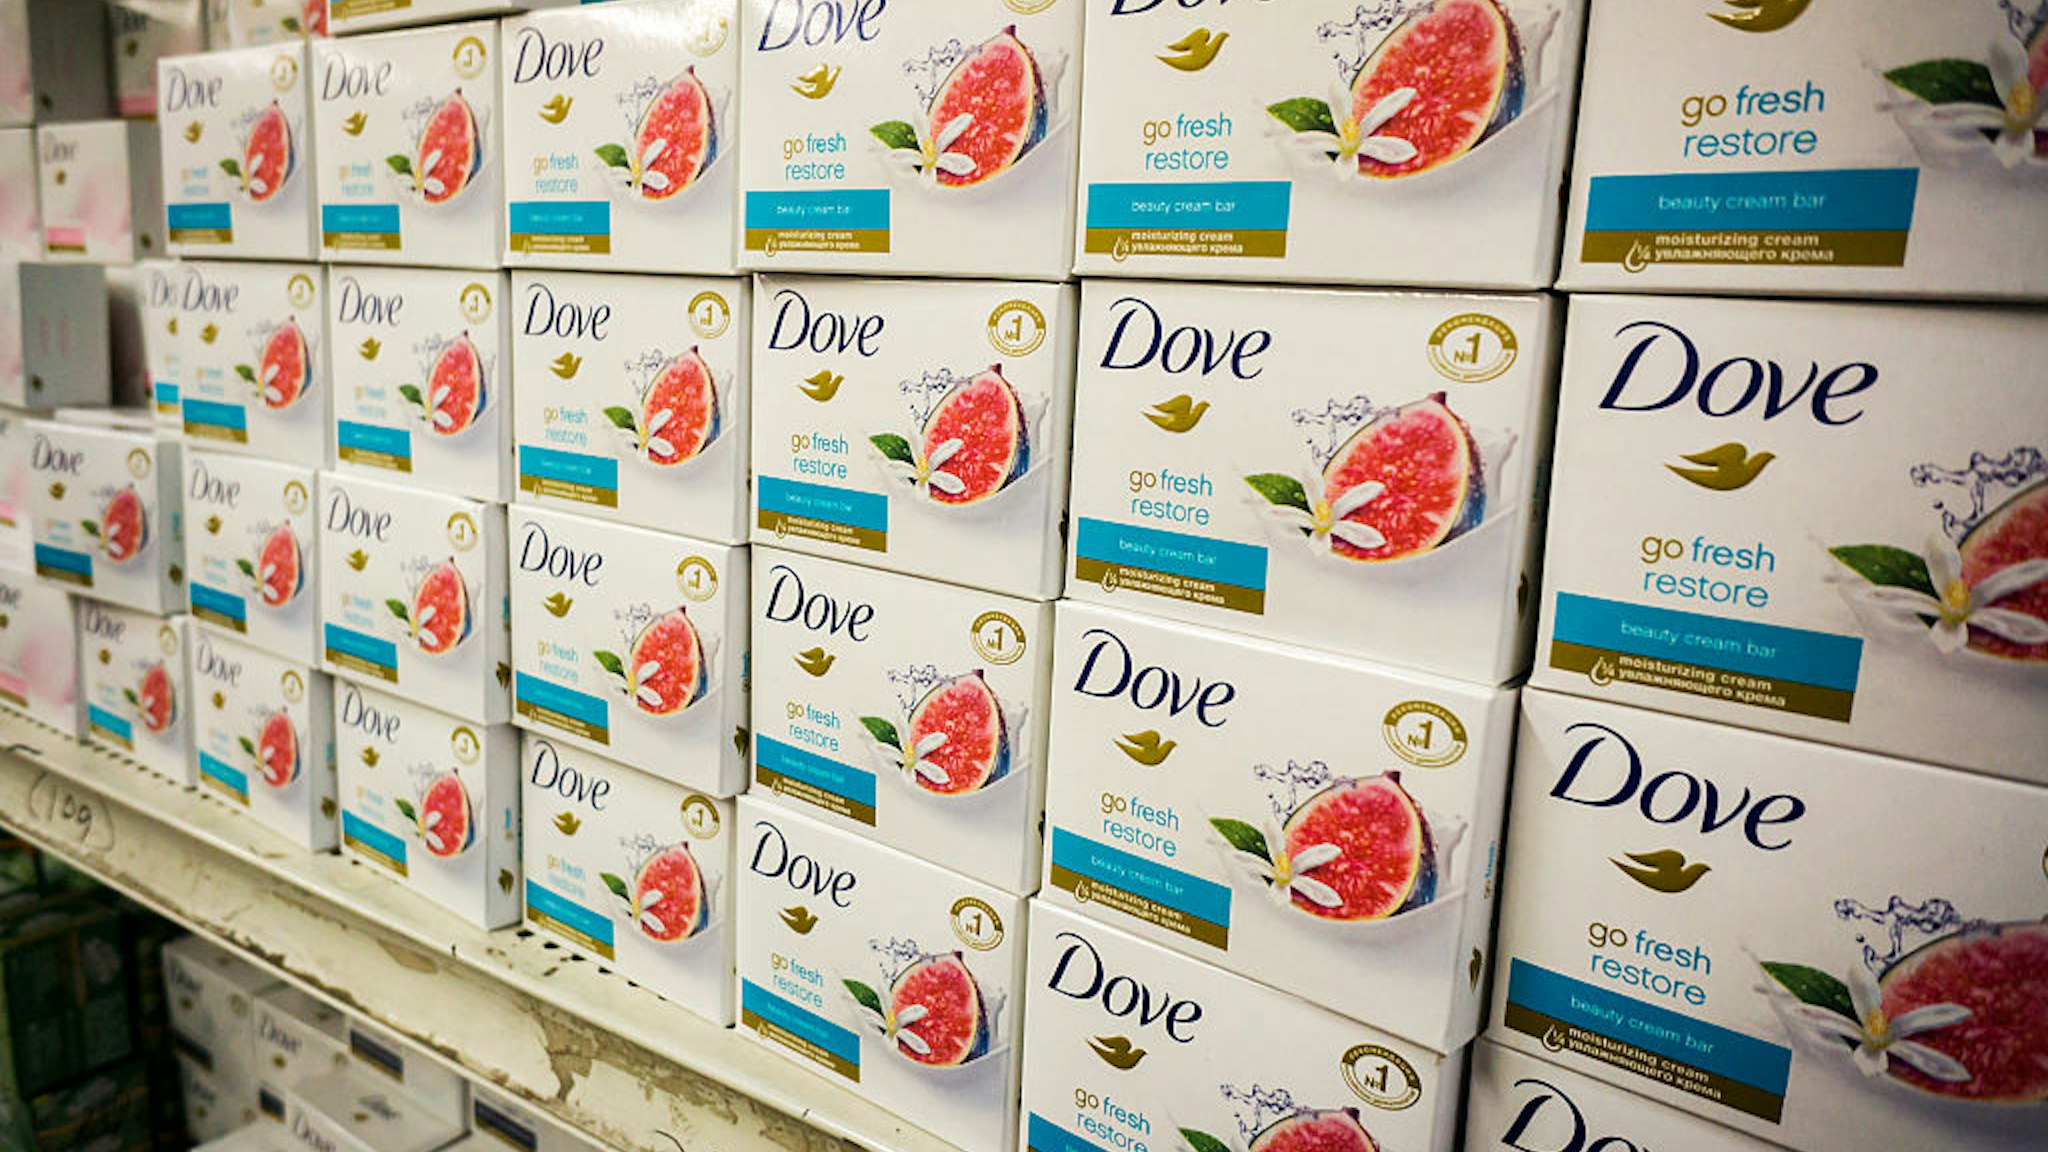 Dove brand soap on the shelves of a store in New York on Sunday, January 3, 2016.